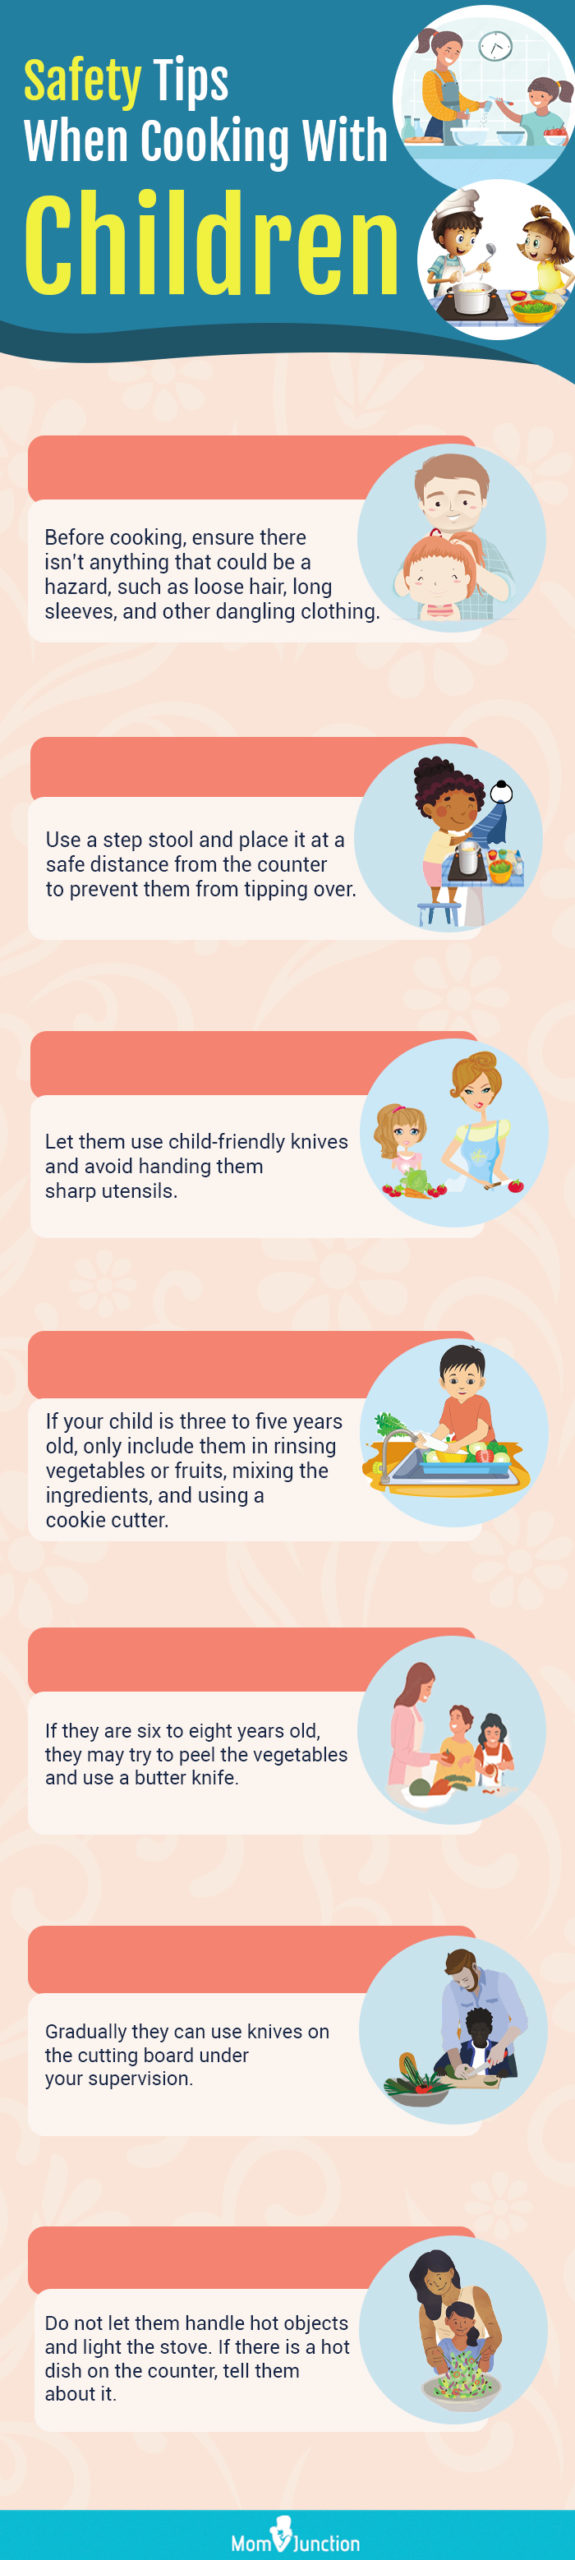 safety tips when cooking with children [infographic]